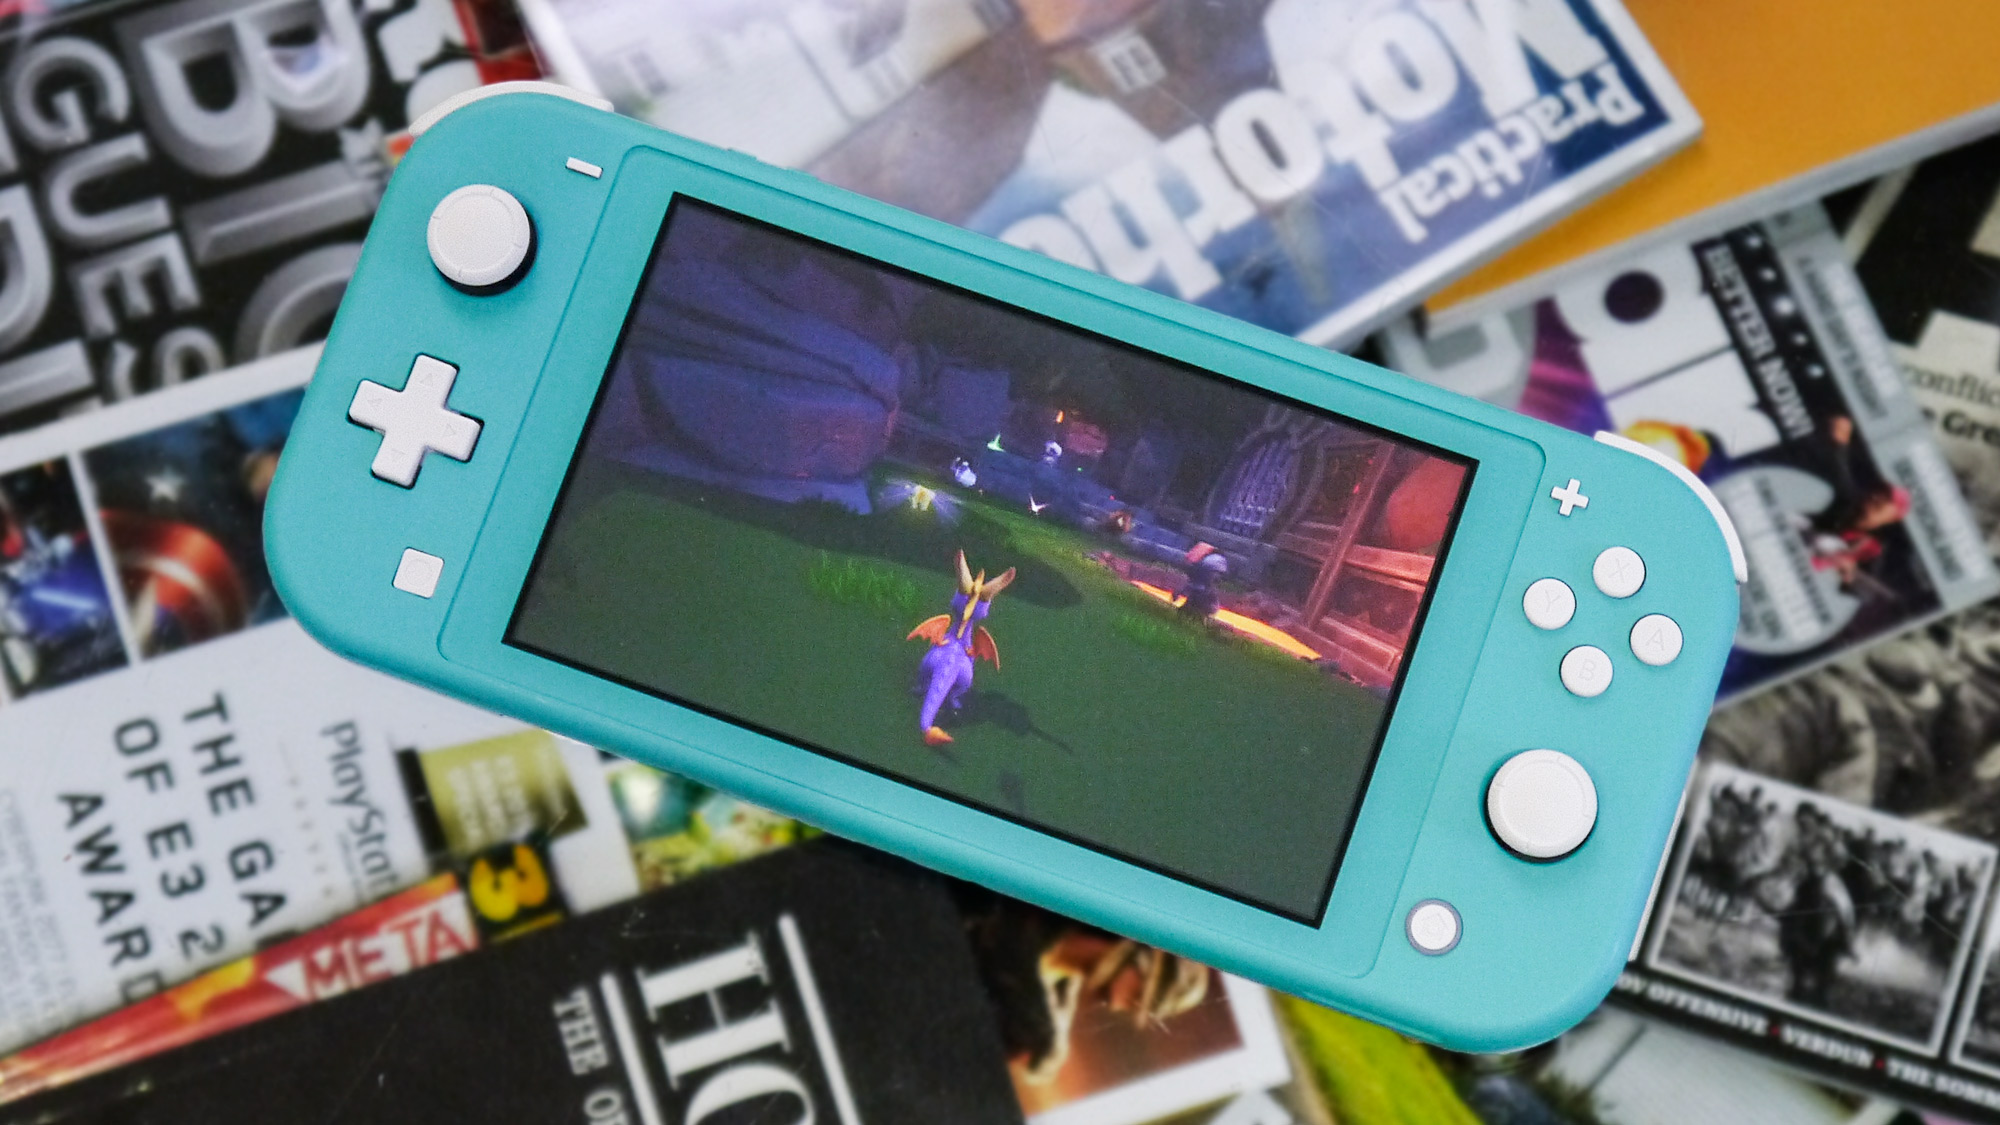 Can You Watch Movies On Switch Lite Nintendo Switch Lite Review Techradar